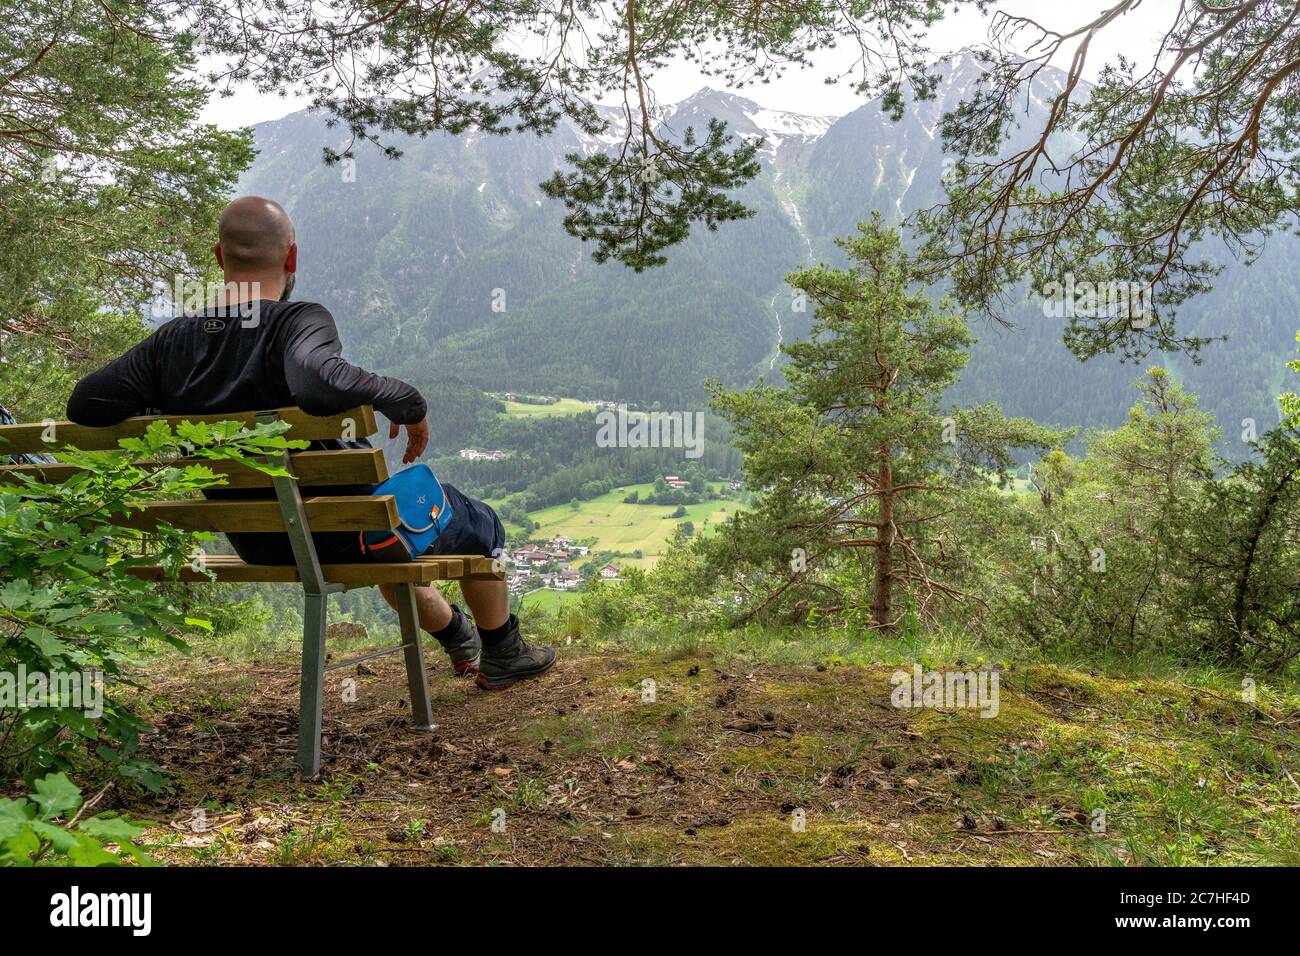 Europe, Austria, Tyrol, Ötztal Alps, Ötztal, hiker sits on a bench with a view of Sautens and the surrounding mountains Stock Photo